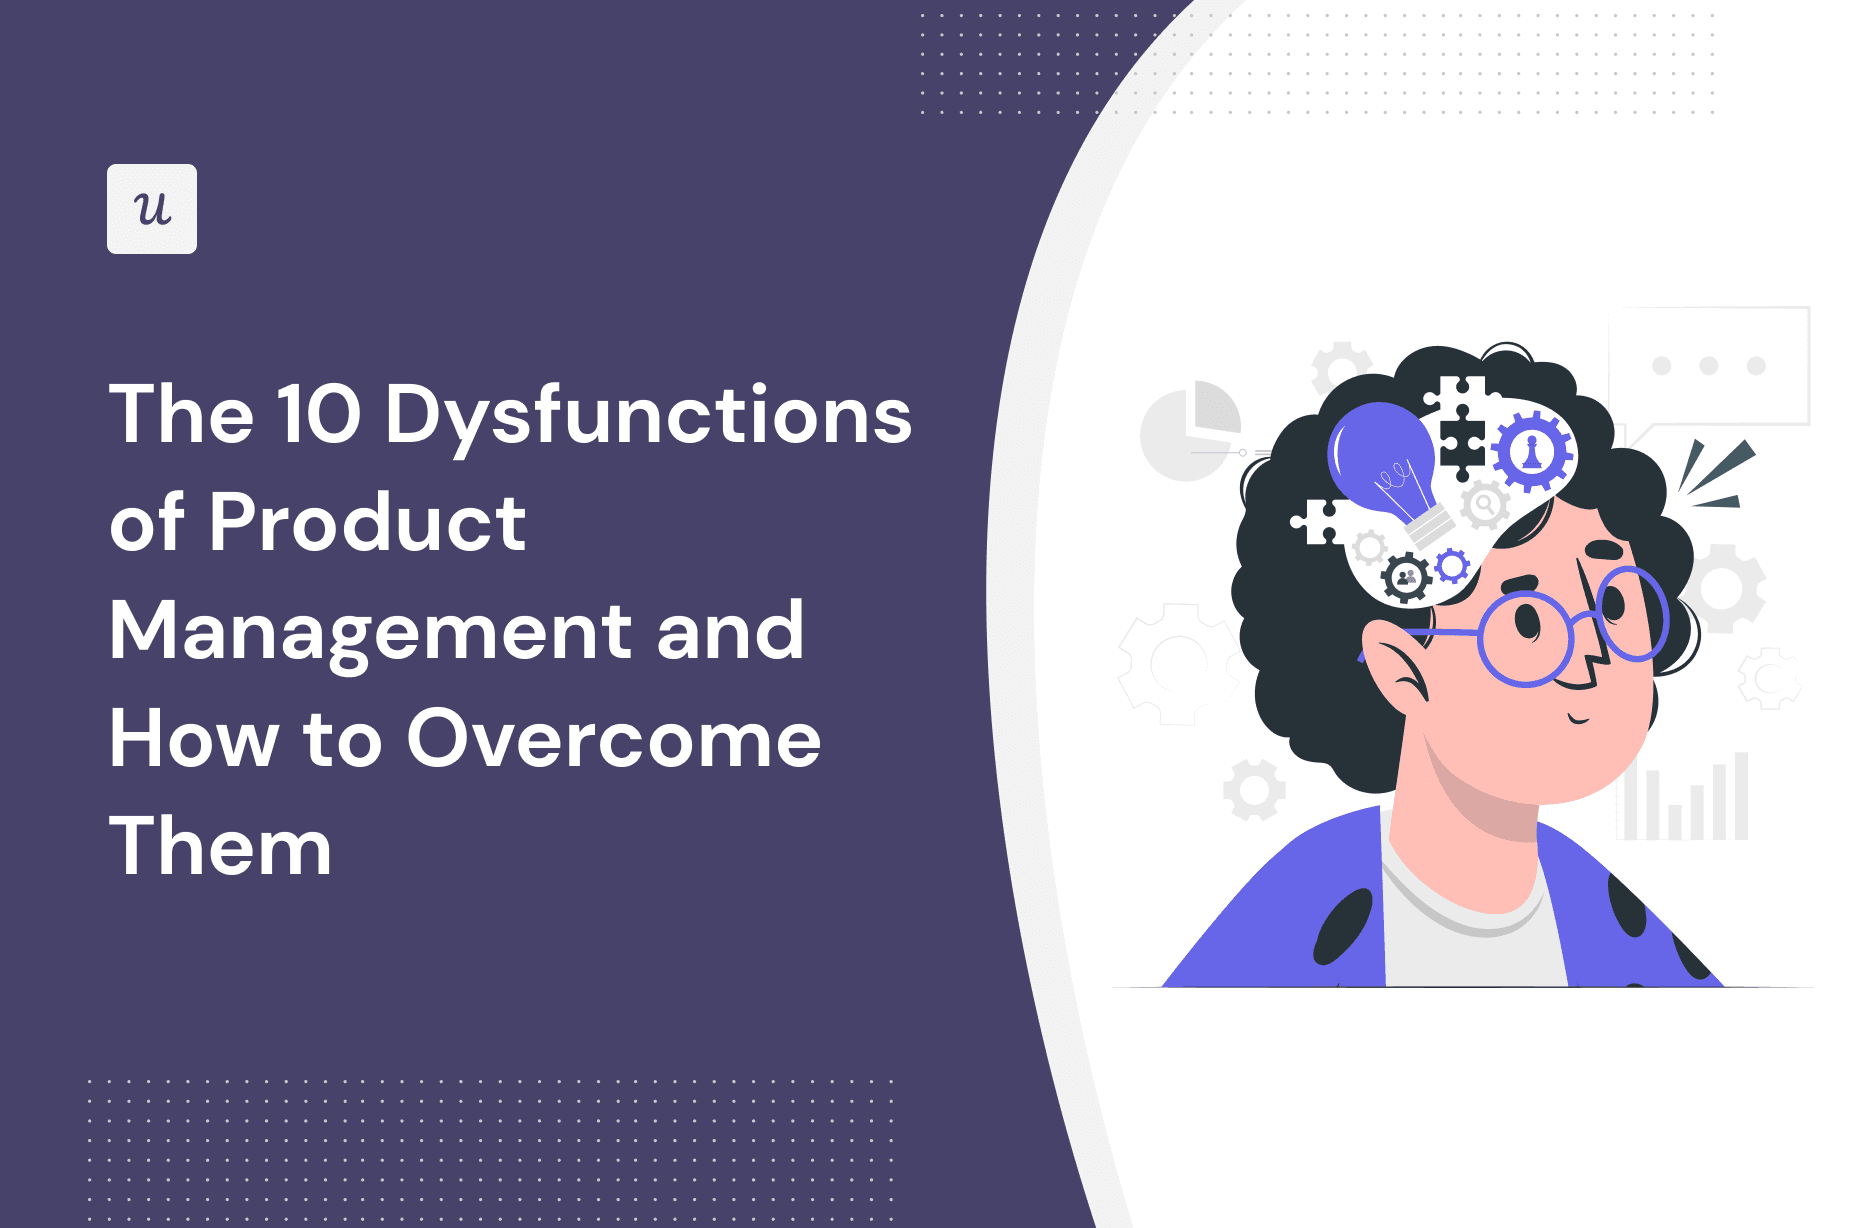 The 10 Dysfunctions of Product Management and How to Overcome Them cover